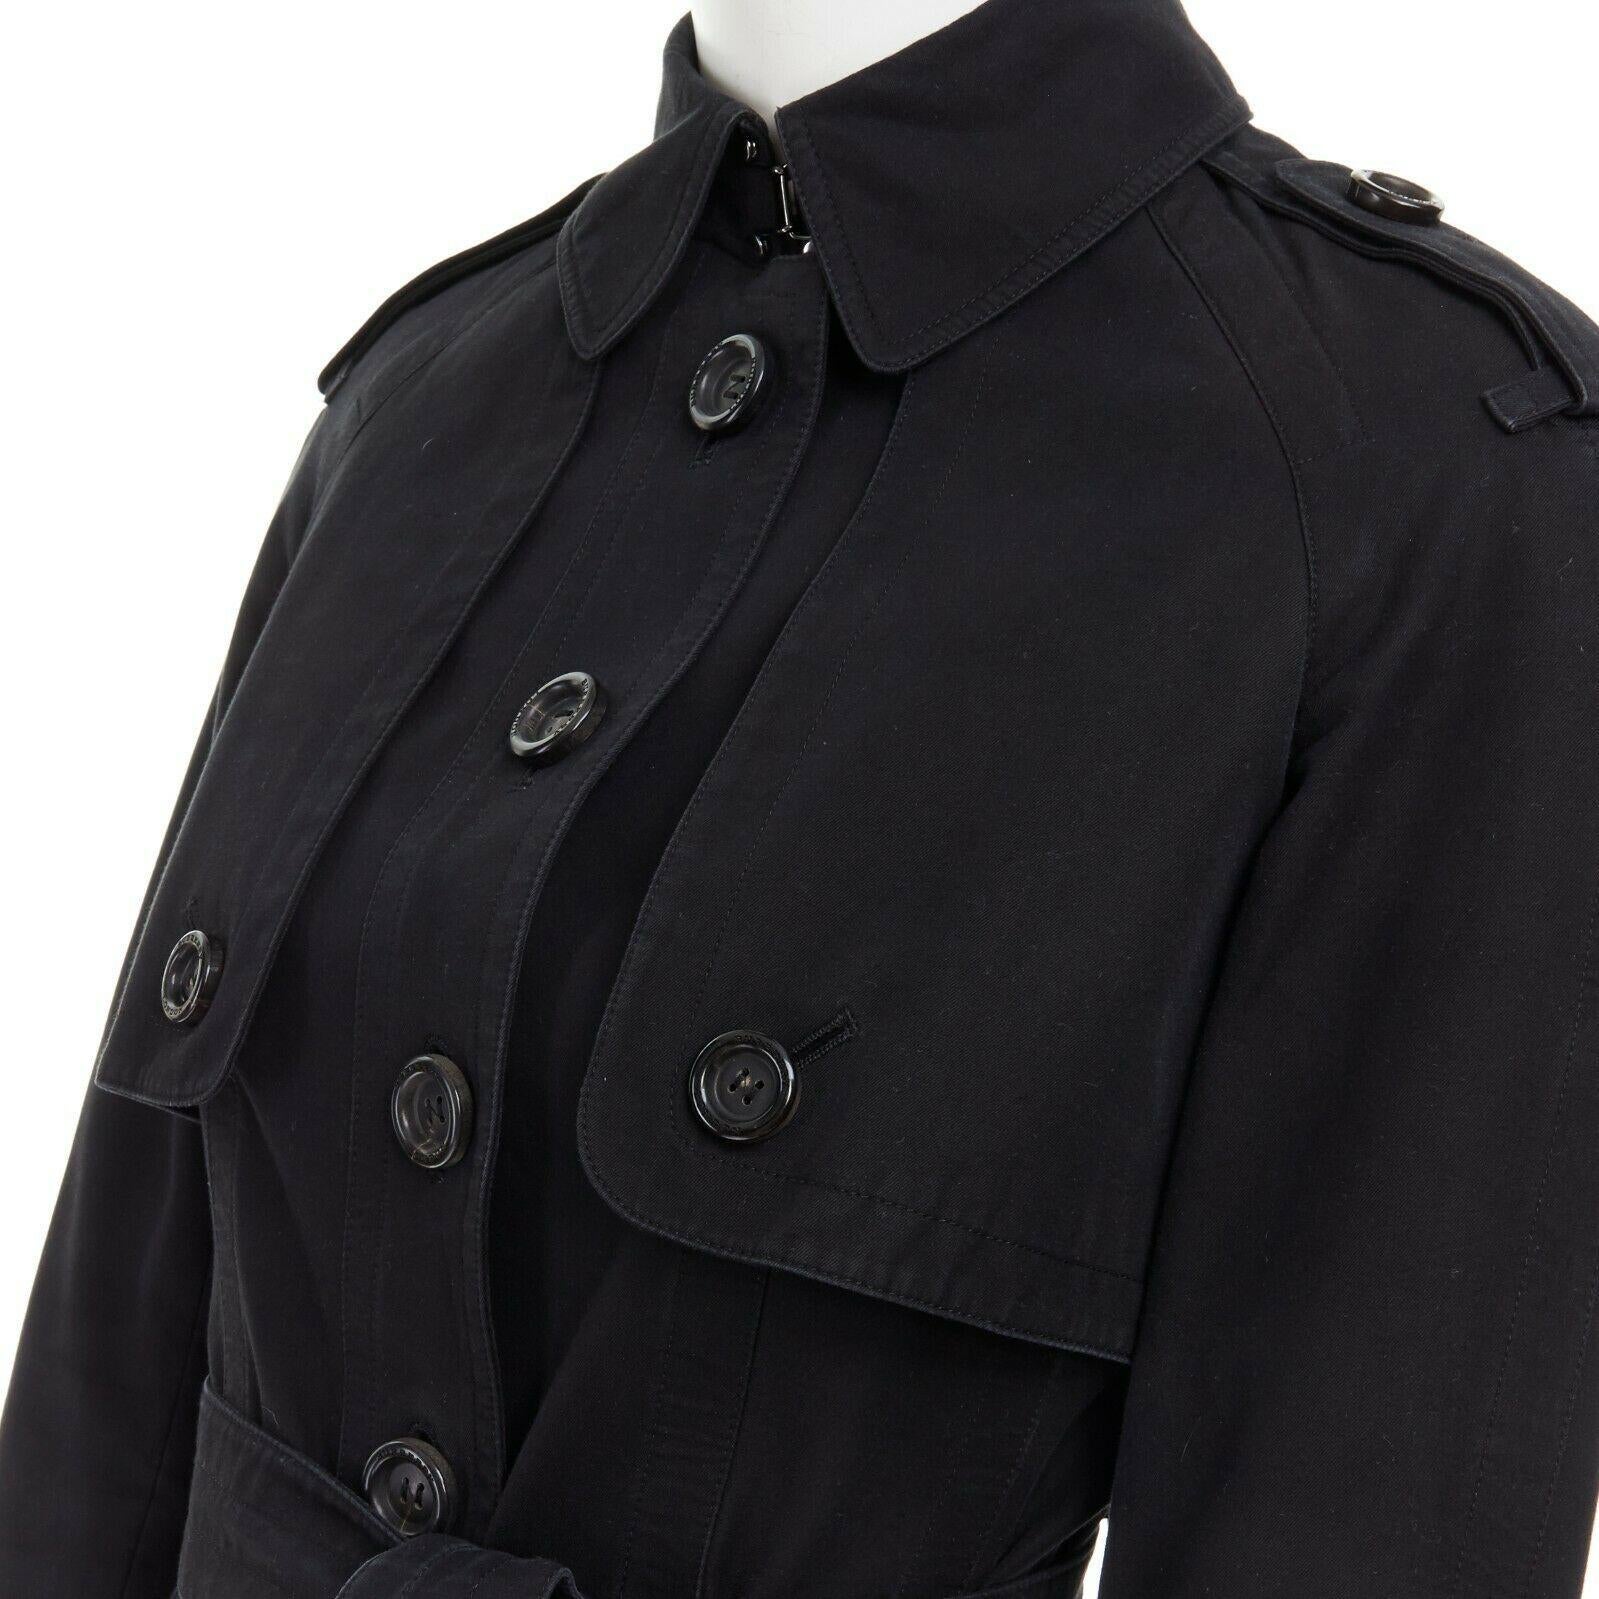 BURBERRY black cotton house check lined button front mid length trench coat S
BURBERRY
100% cotton. 
Black. 
Spread collar. 
Button front closure. 
Large resin button with Burberry London engraved. 
Shoulder epaulette. 
Button pockets. 
Long